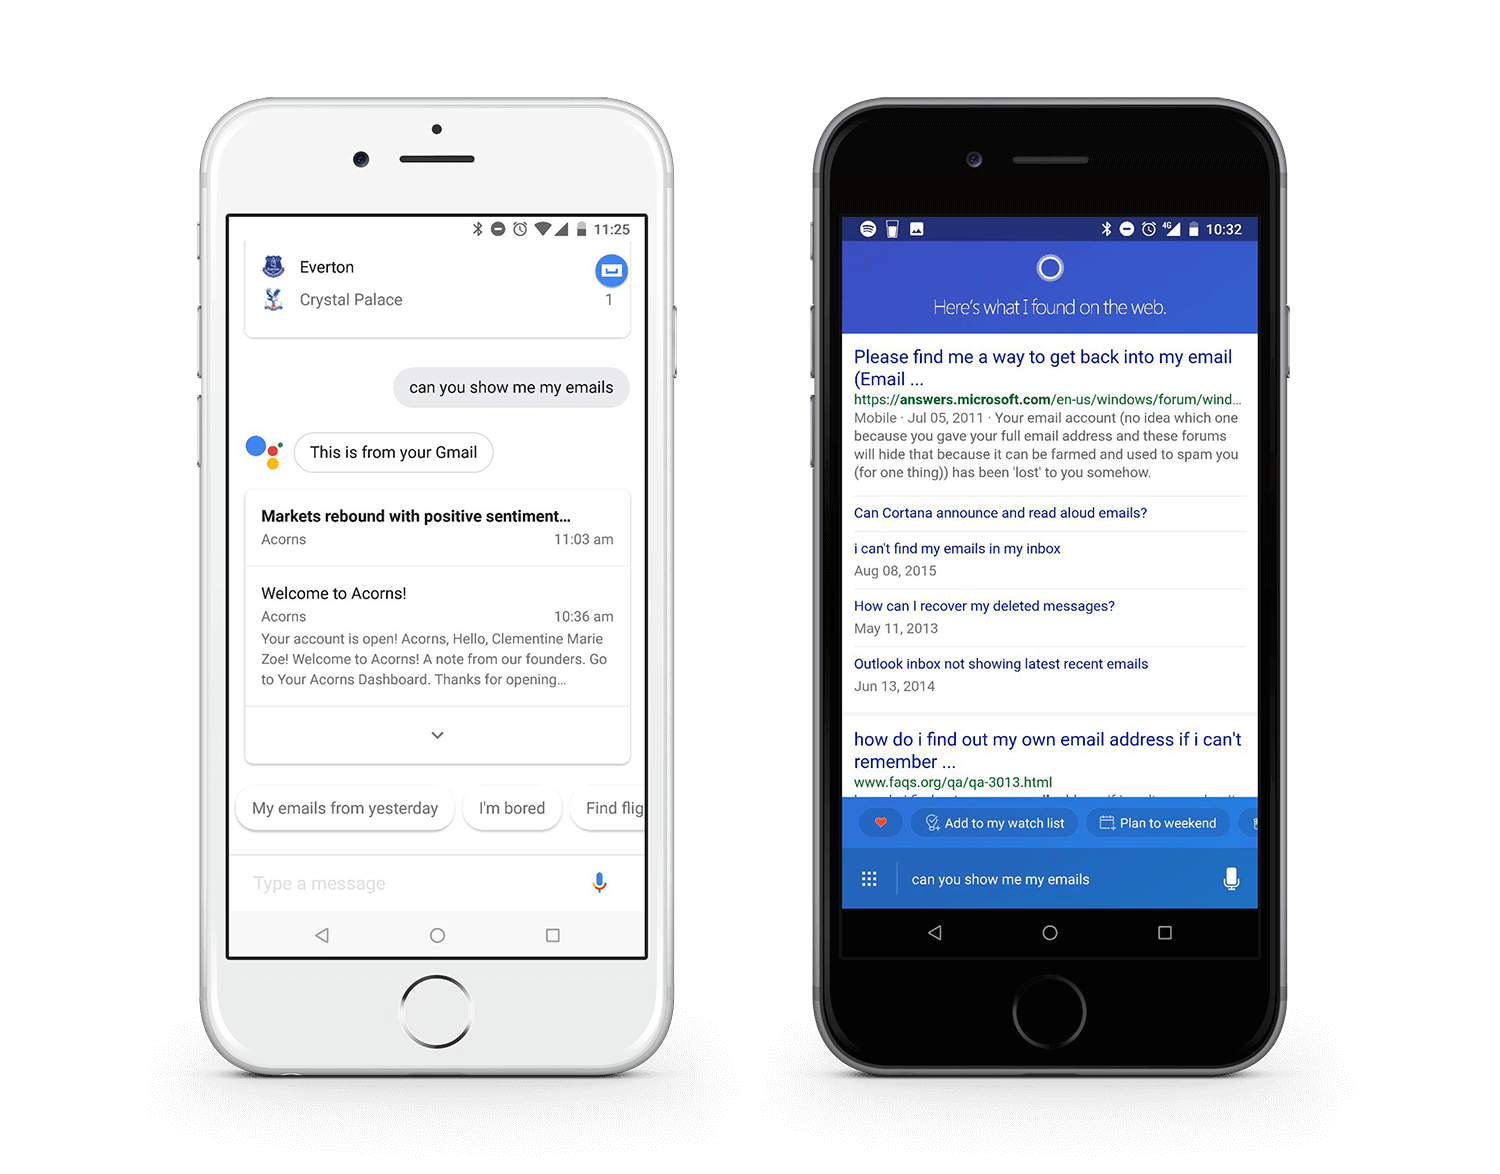 Comparison of Google Assistant and Cortana search results for "Show me my emails"